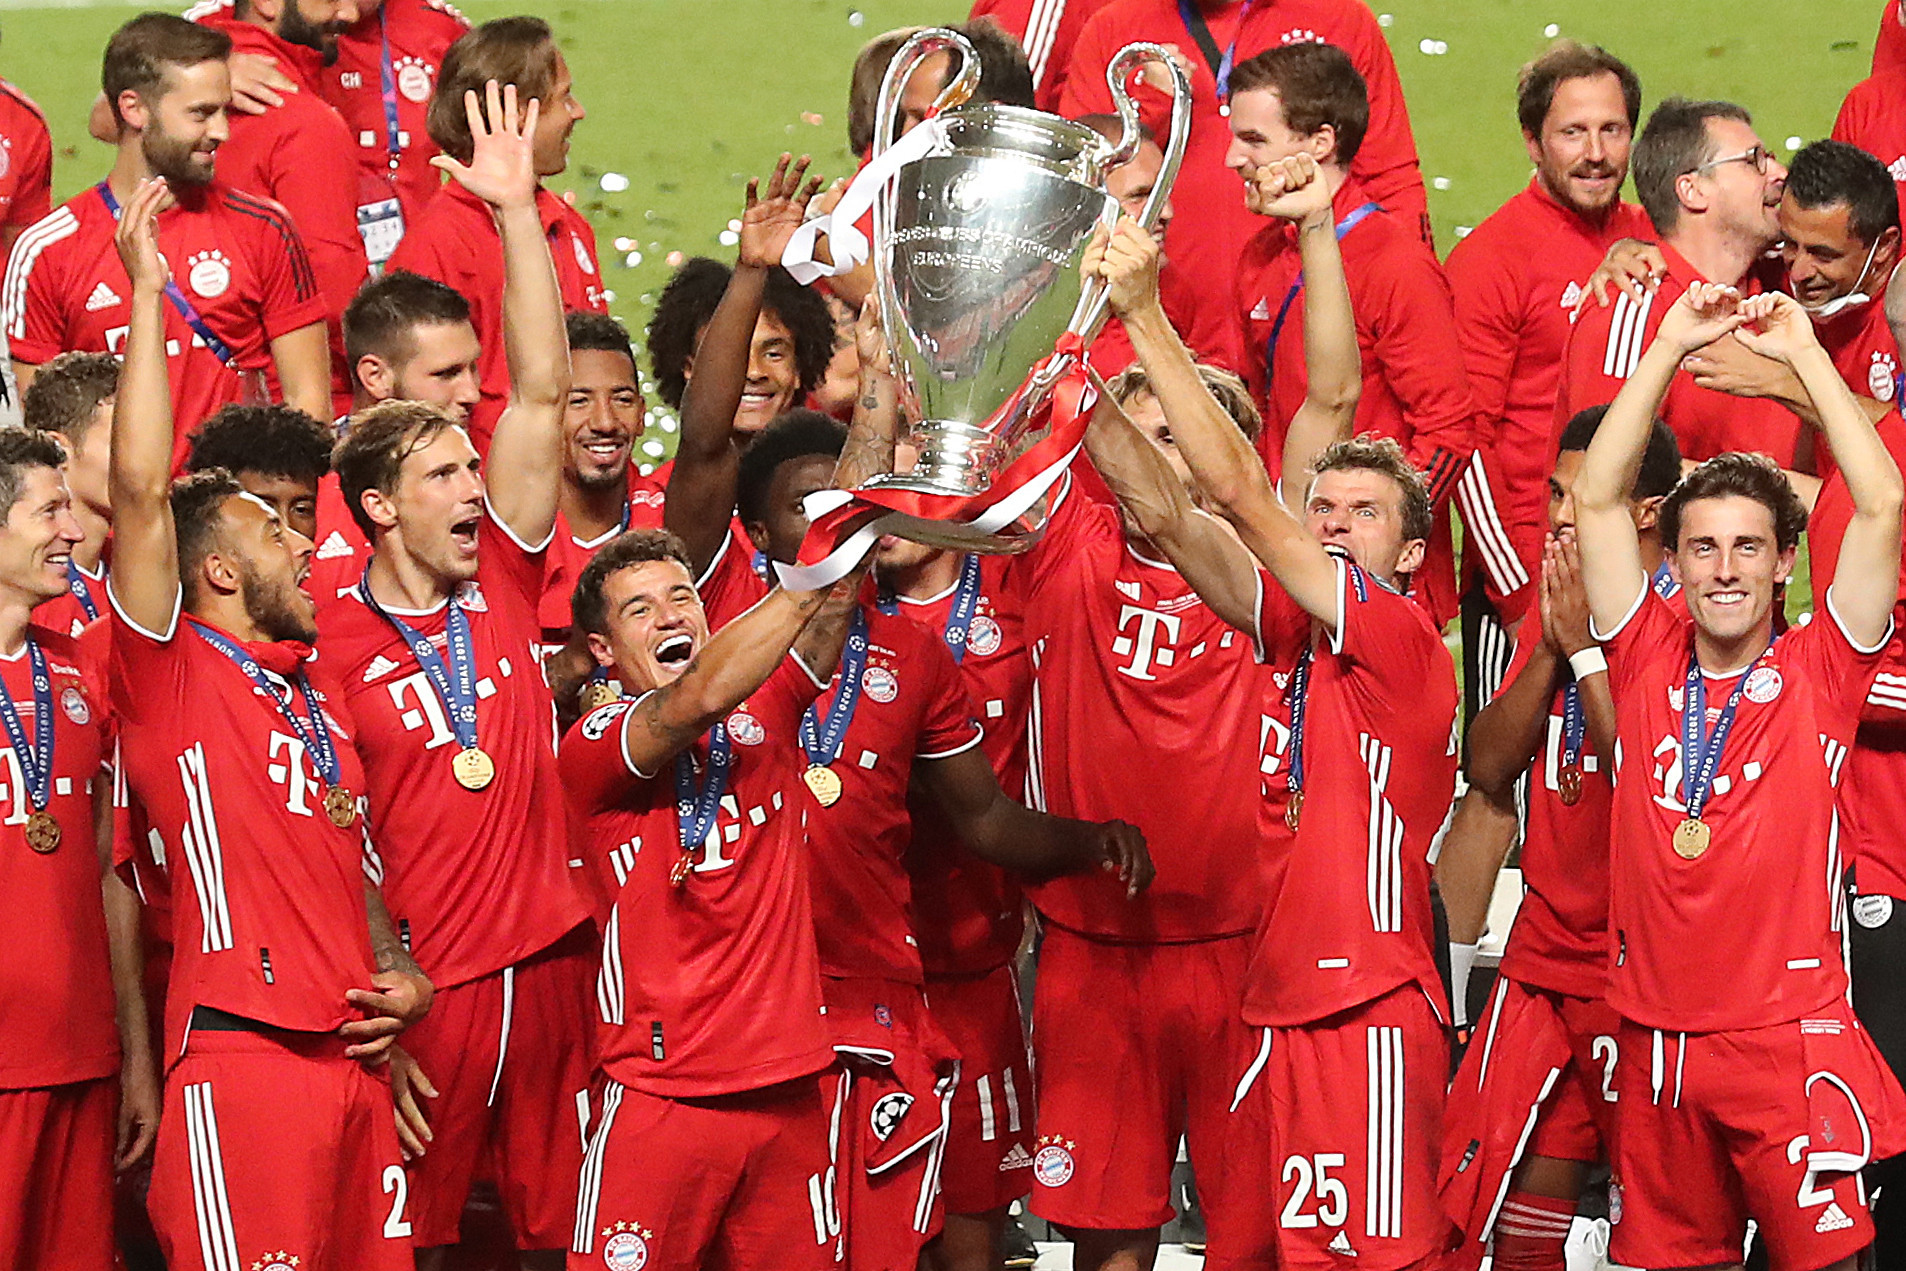 Bayern Munich are up for the Laureus World Team of the Year Award after winning the UEFA Champions League ©Getty Images